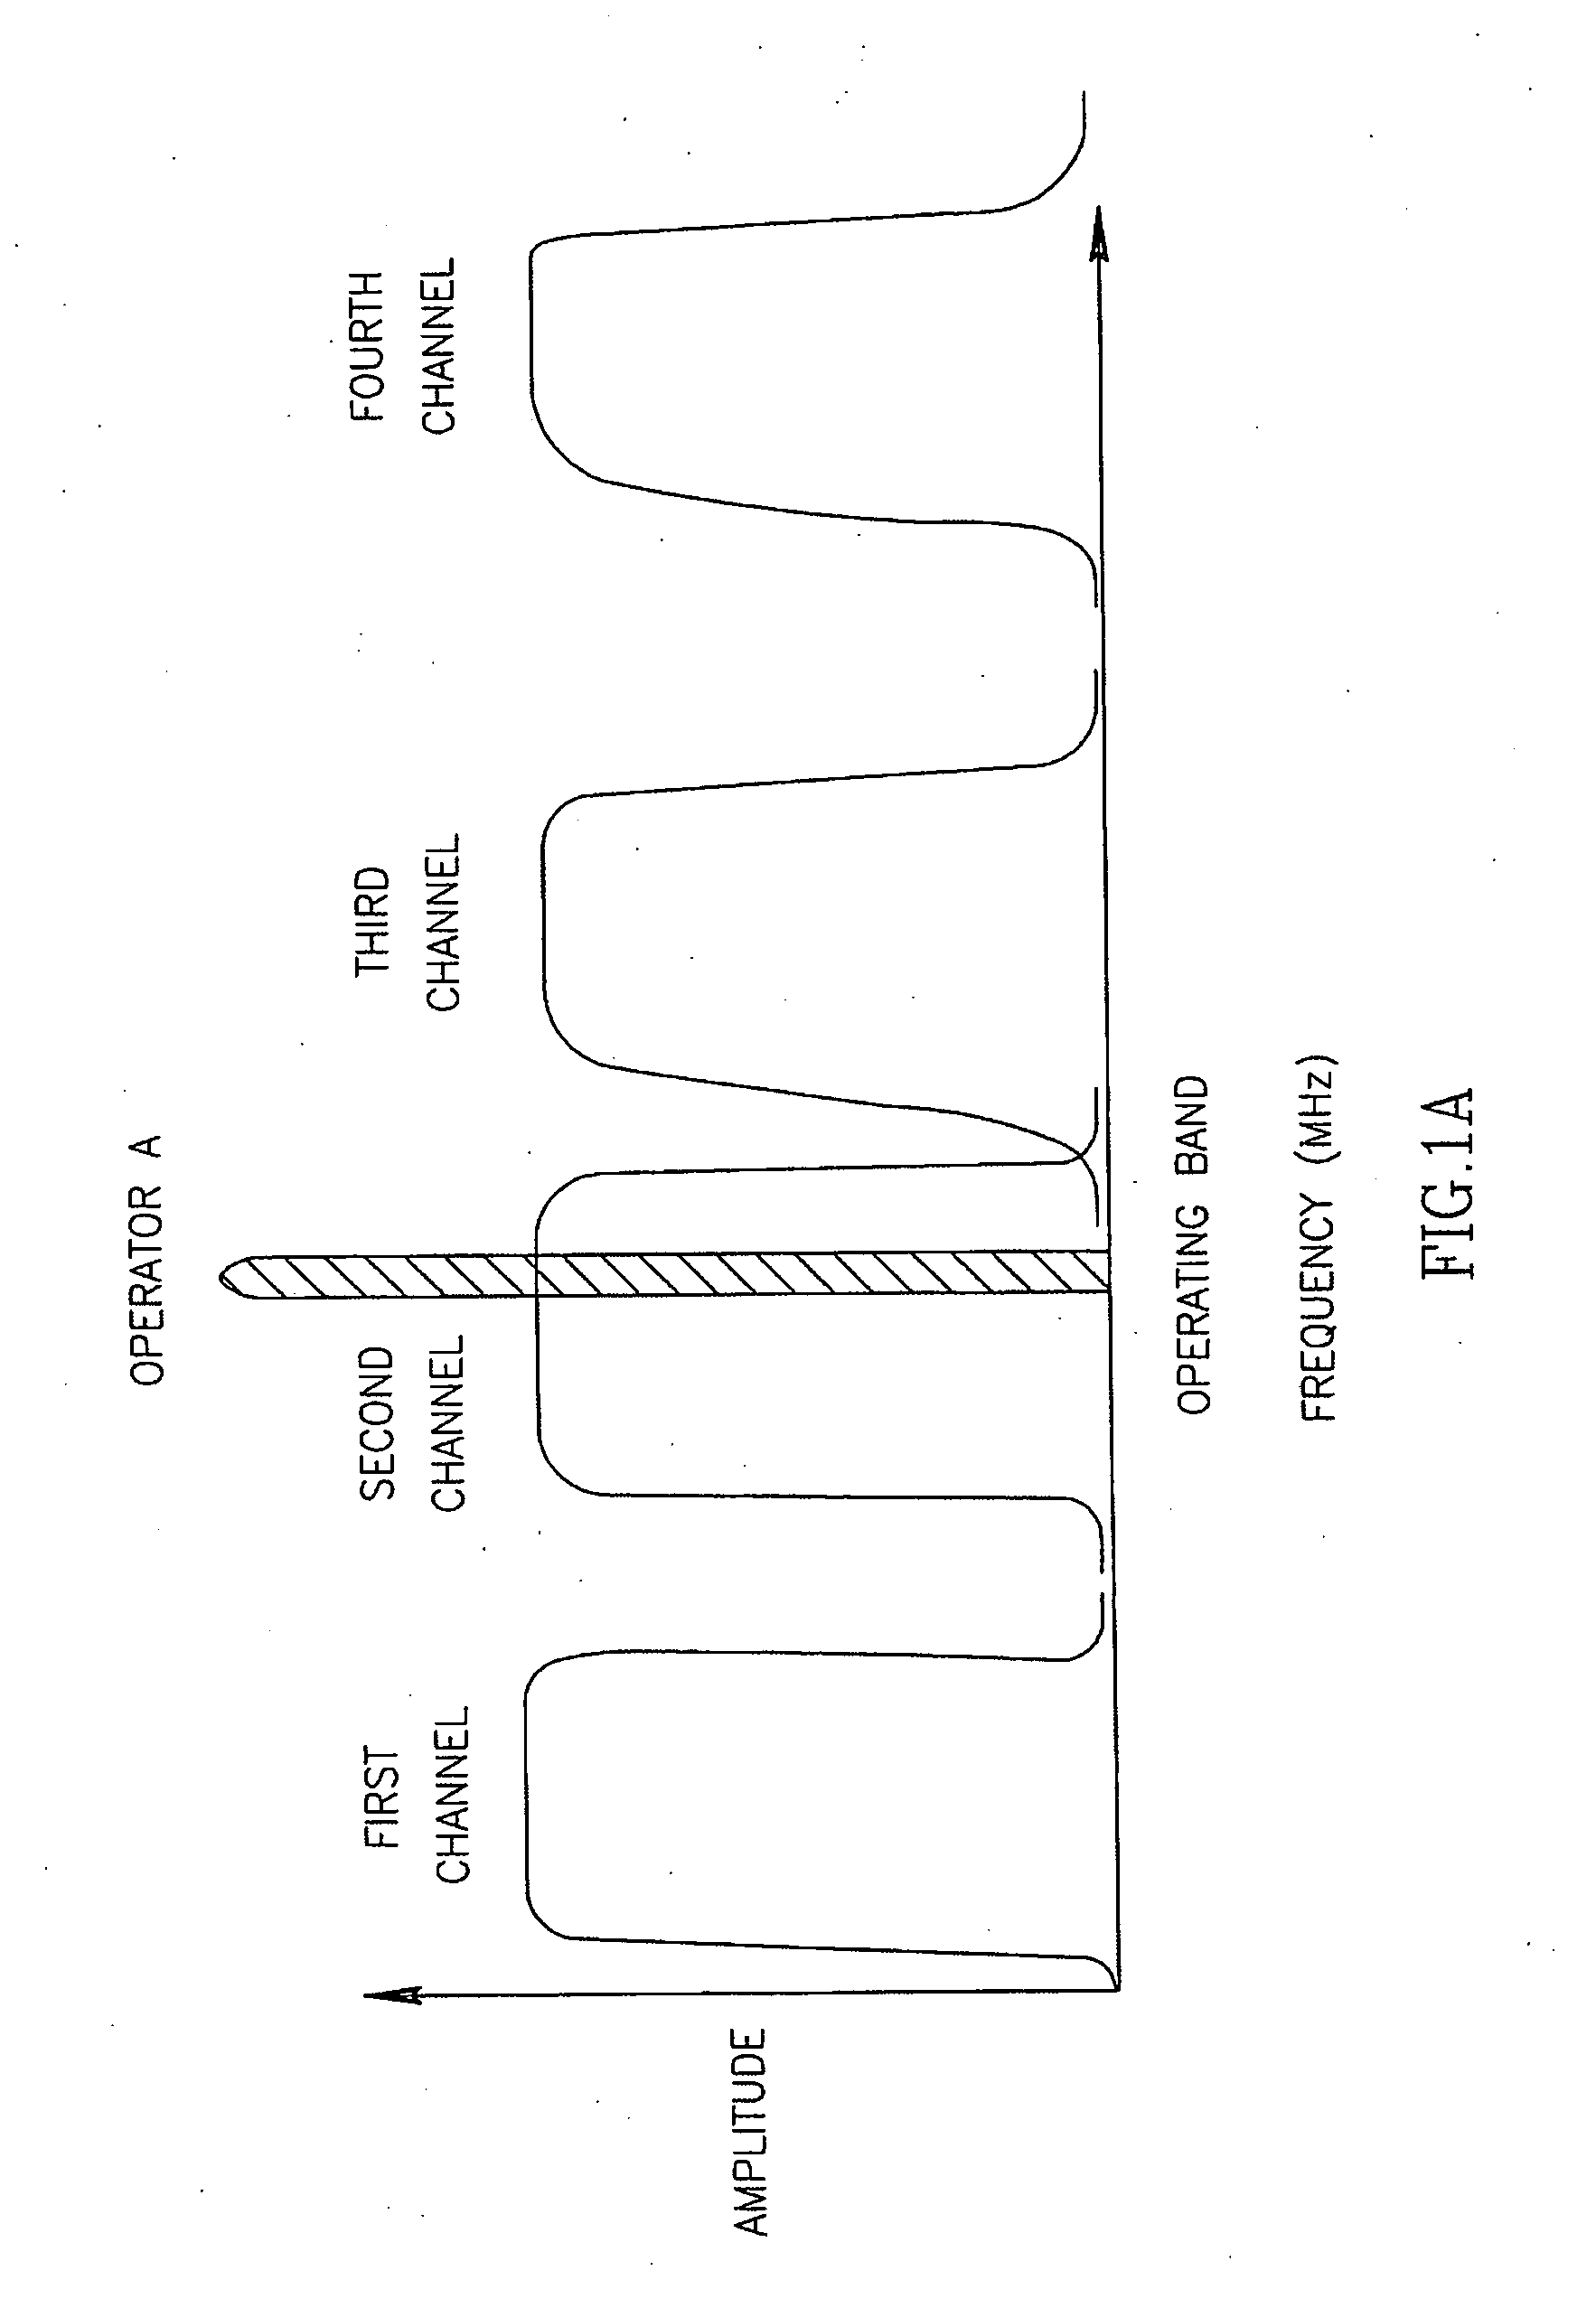 System and method for excluding narrow band noise from a communication channel